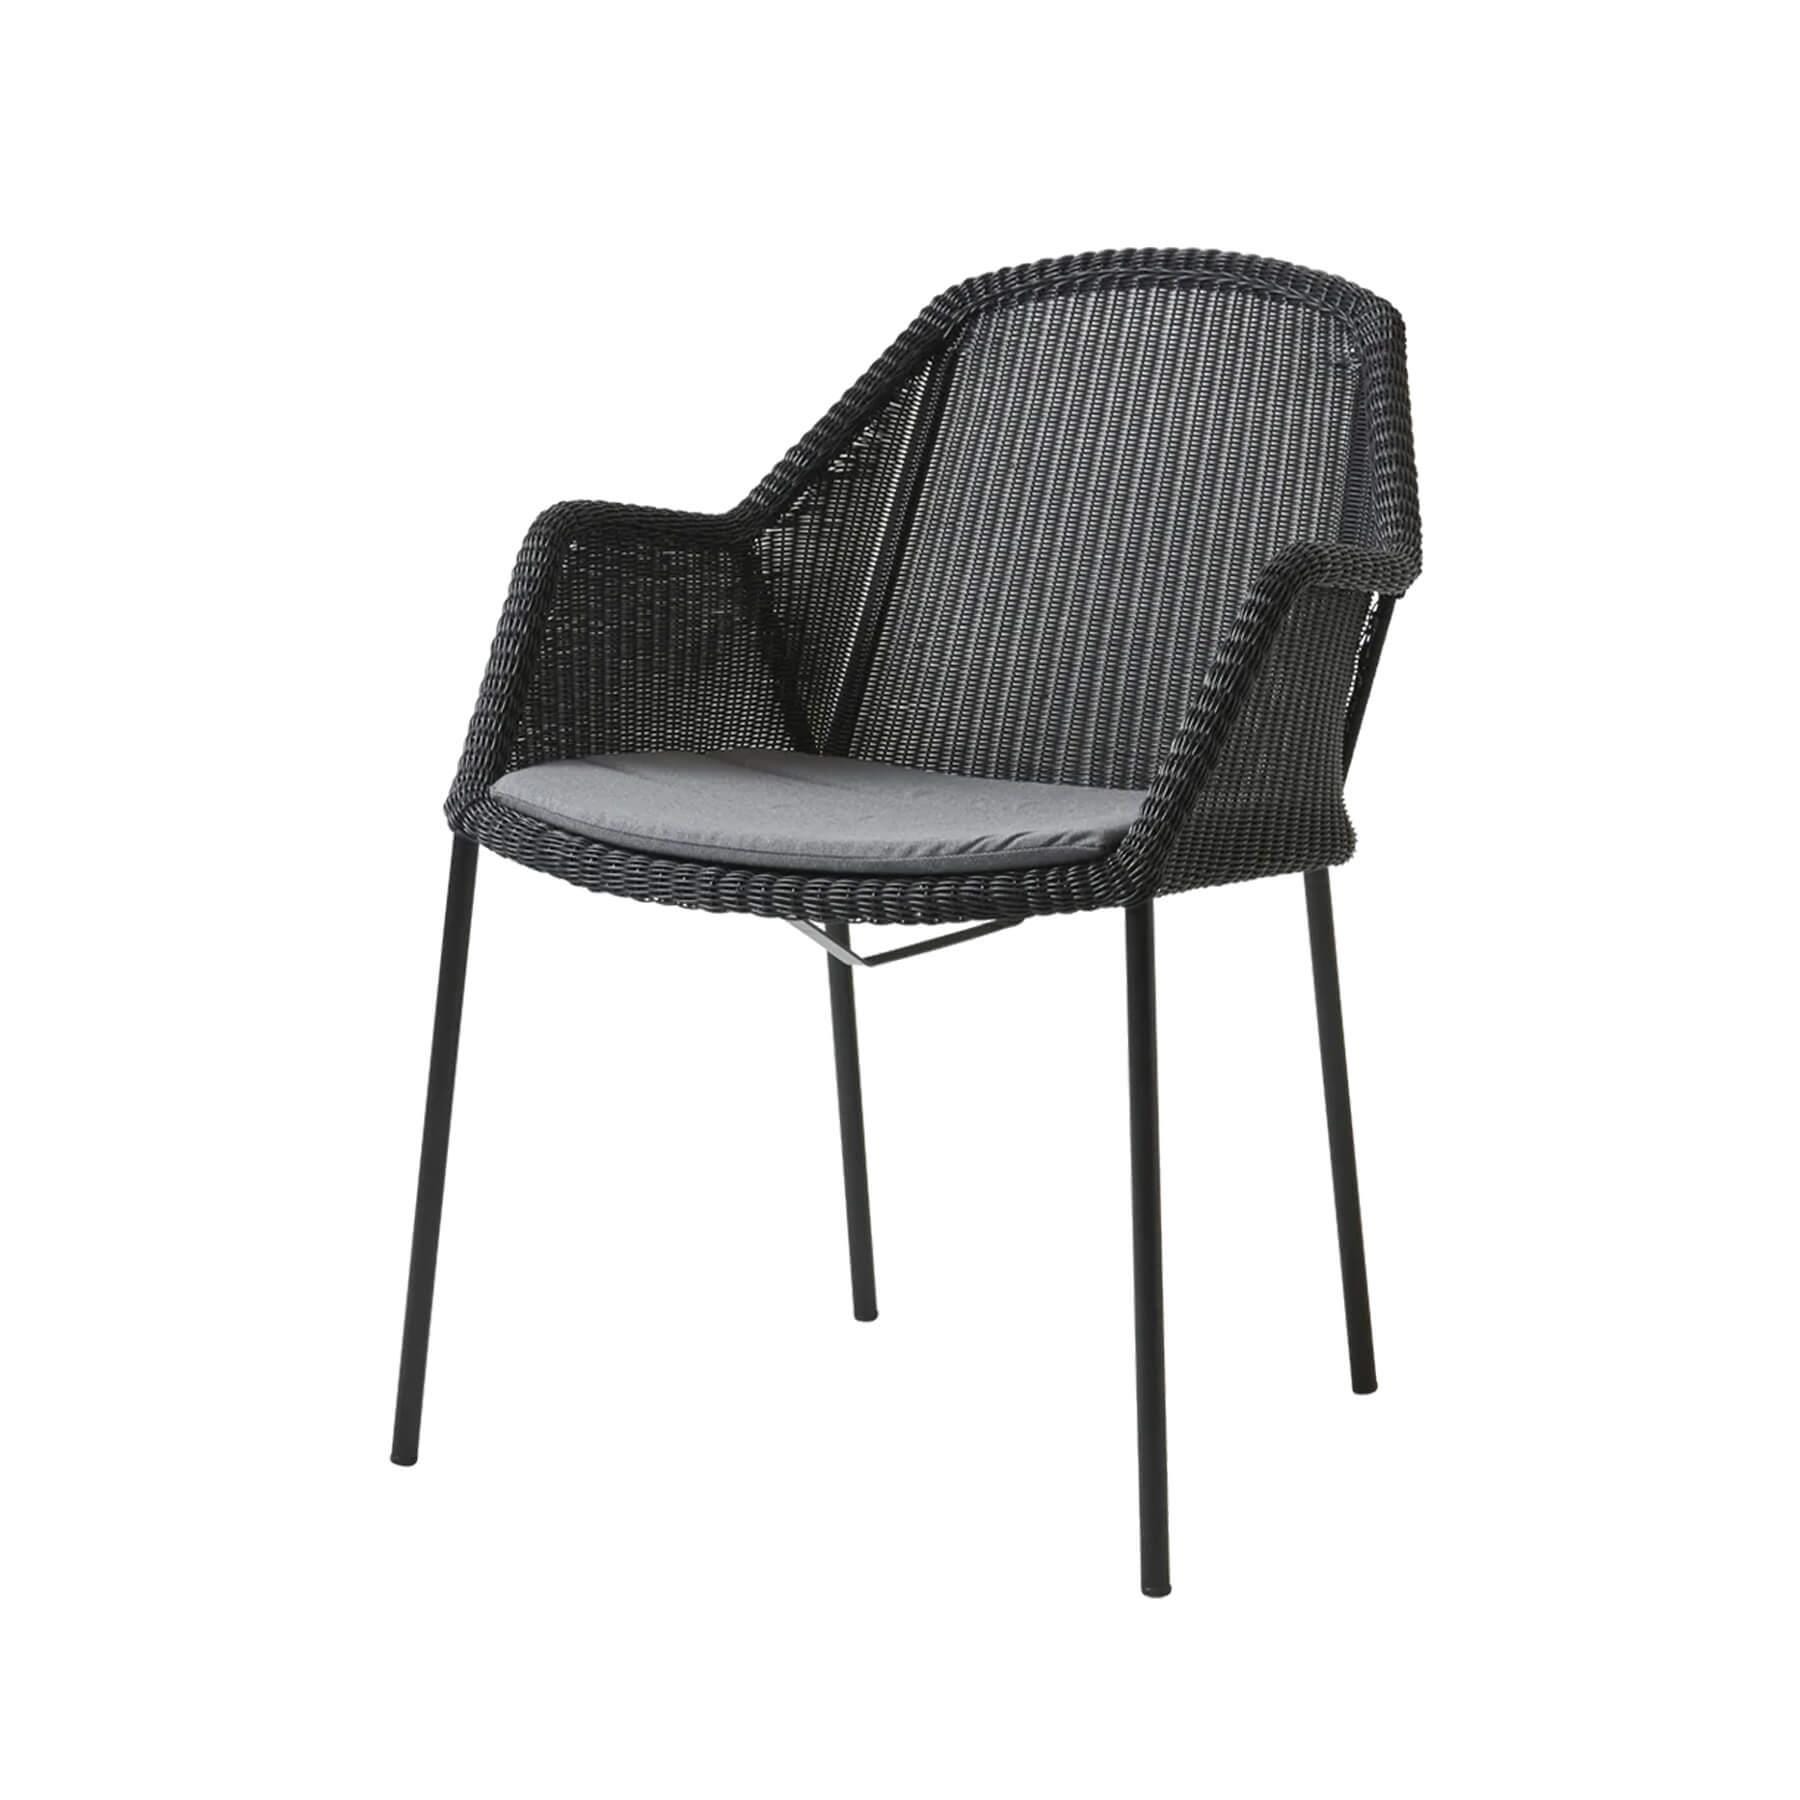 Caneline Breeze Outdoor Chair Black Seat Natte Grey Cushion